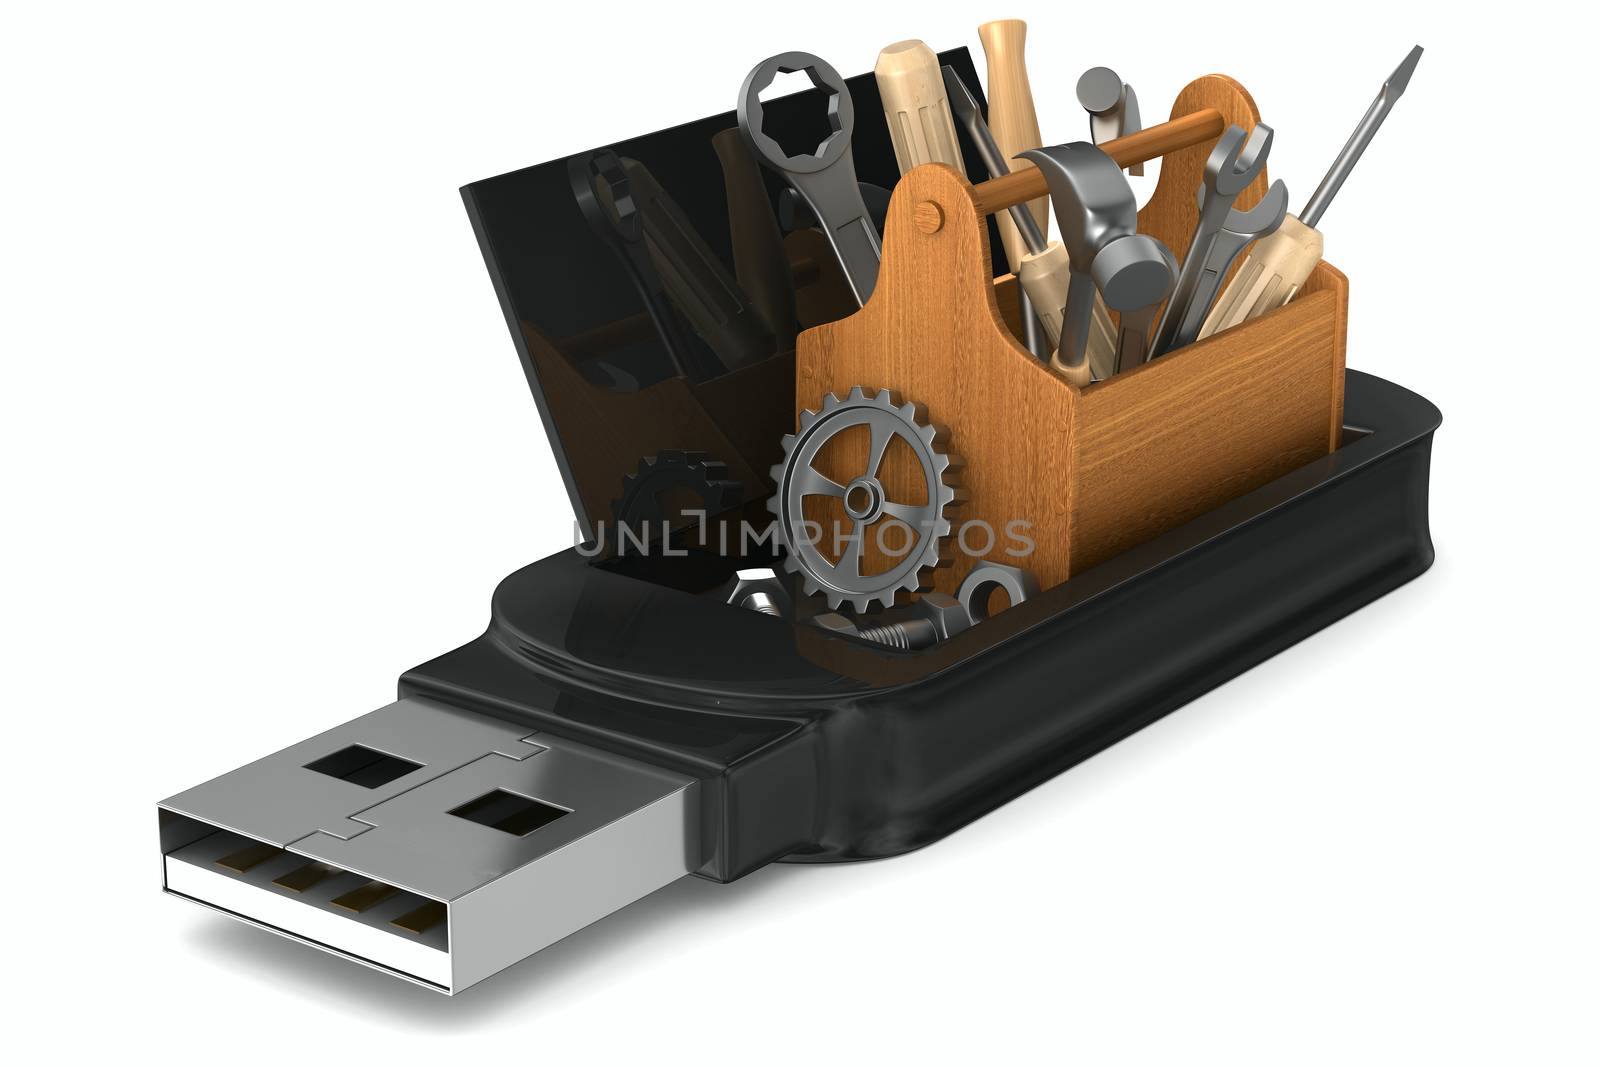 rescue usb flash drive on white background. Isolated 3D image